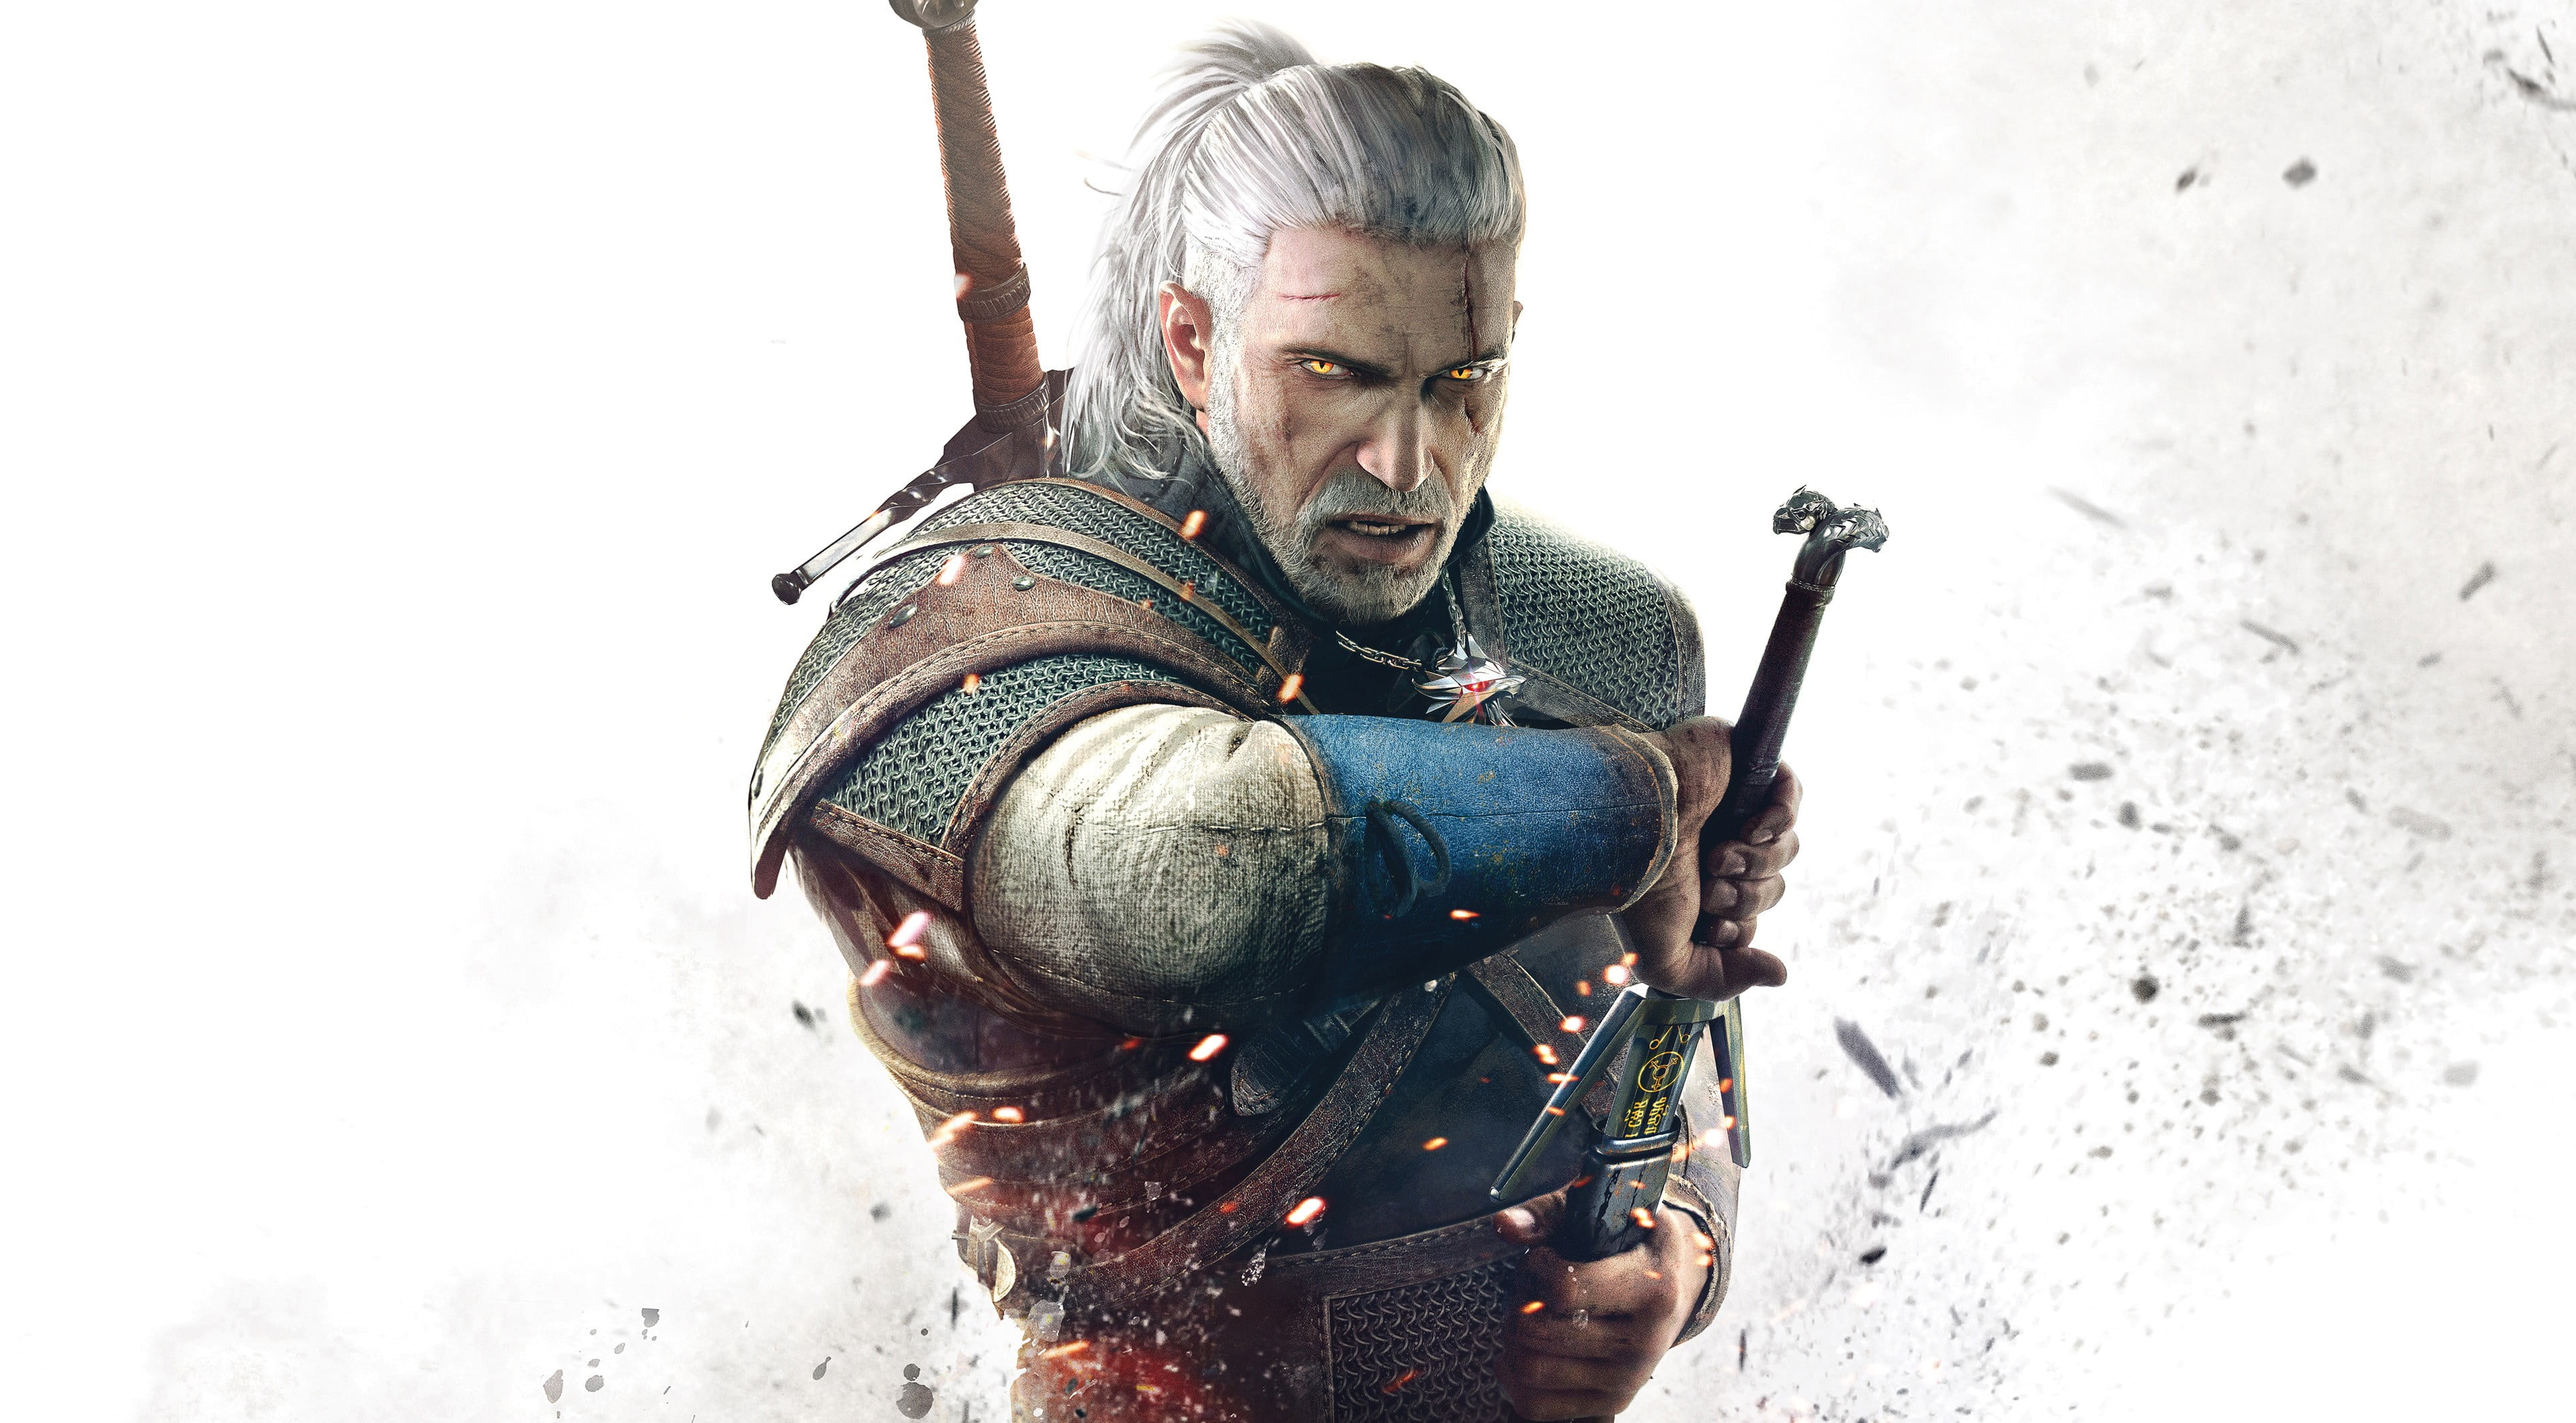 The Witcher wallpaper, The Witcher 3: Wild Hunt, Geralt of Rivia